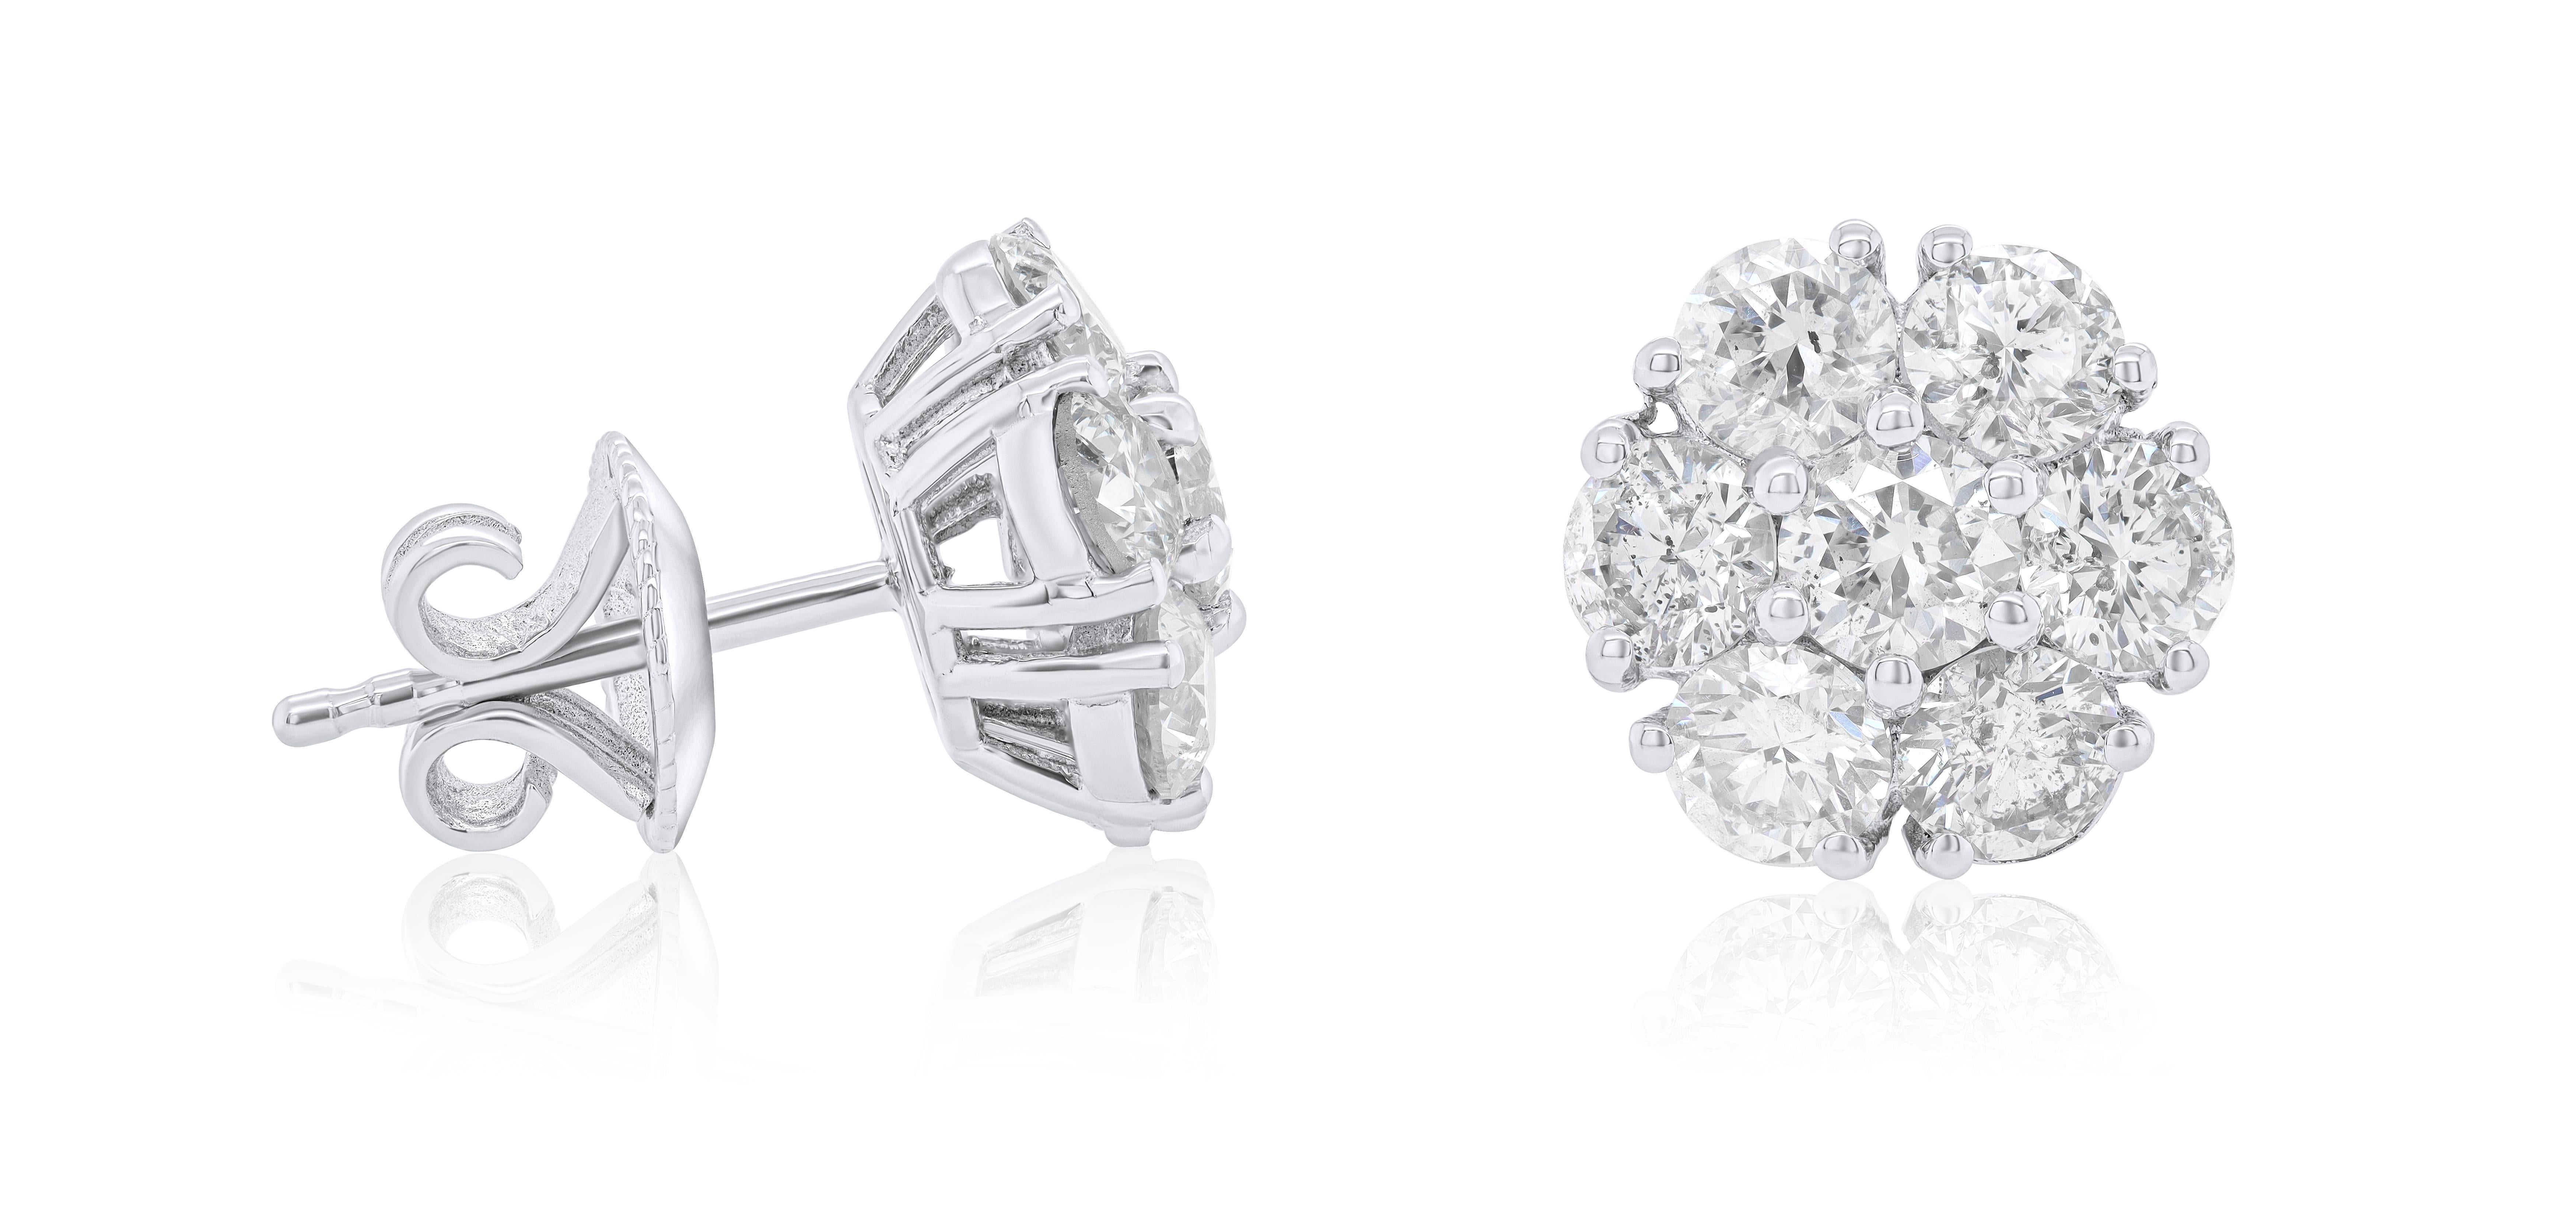 14 kt white gold stud earrings with a flower design adorned with 3.00 cts tw of round diamonds (14 stones)
Diana M. is a leading supplier of top-quality fine jewelry for over 35 years.
Diana M is one-stop shop for all your jewelry shopping, carrying